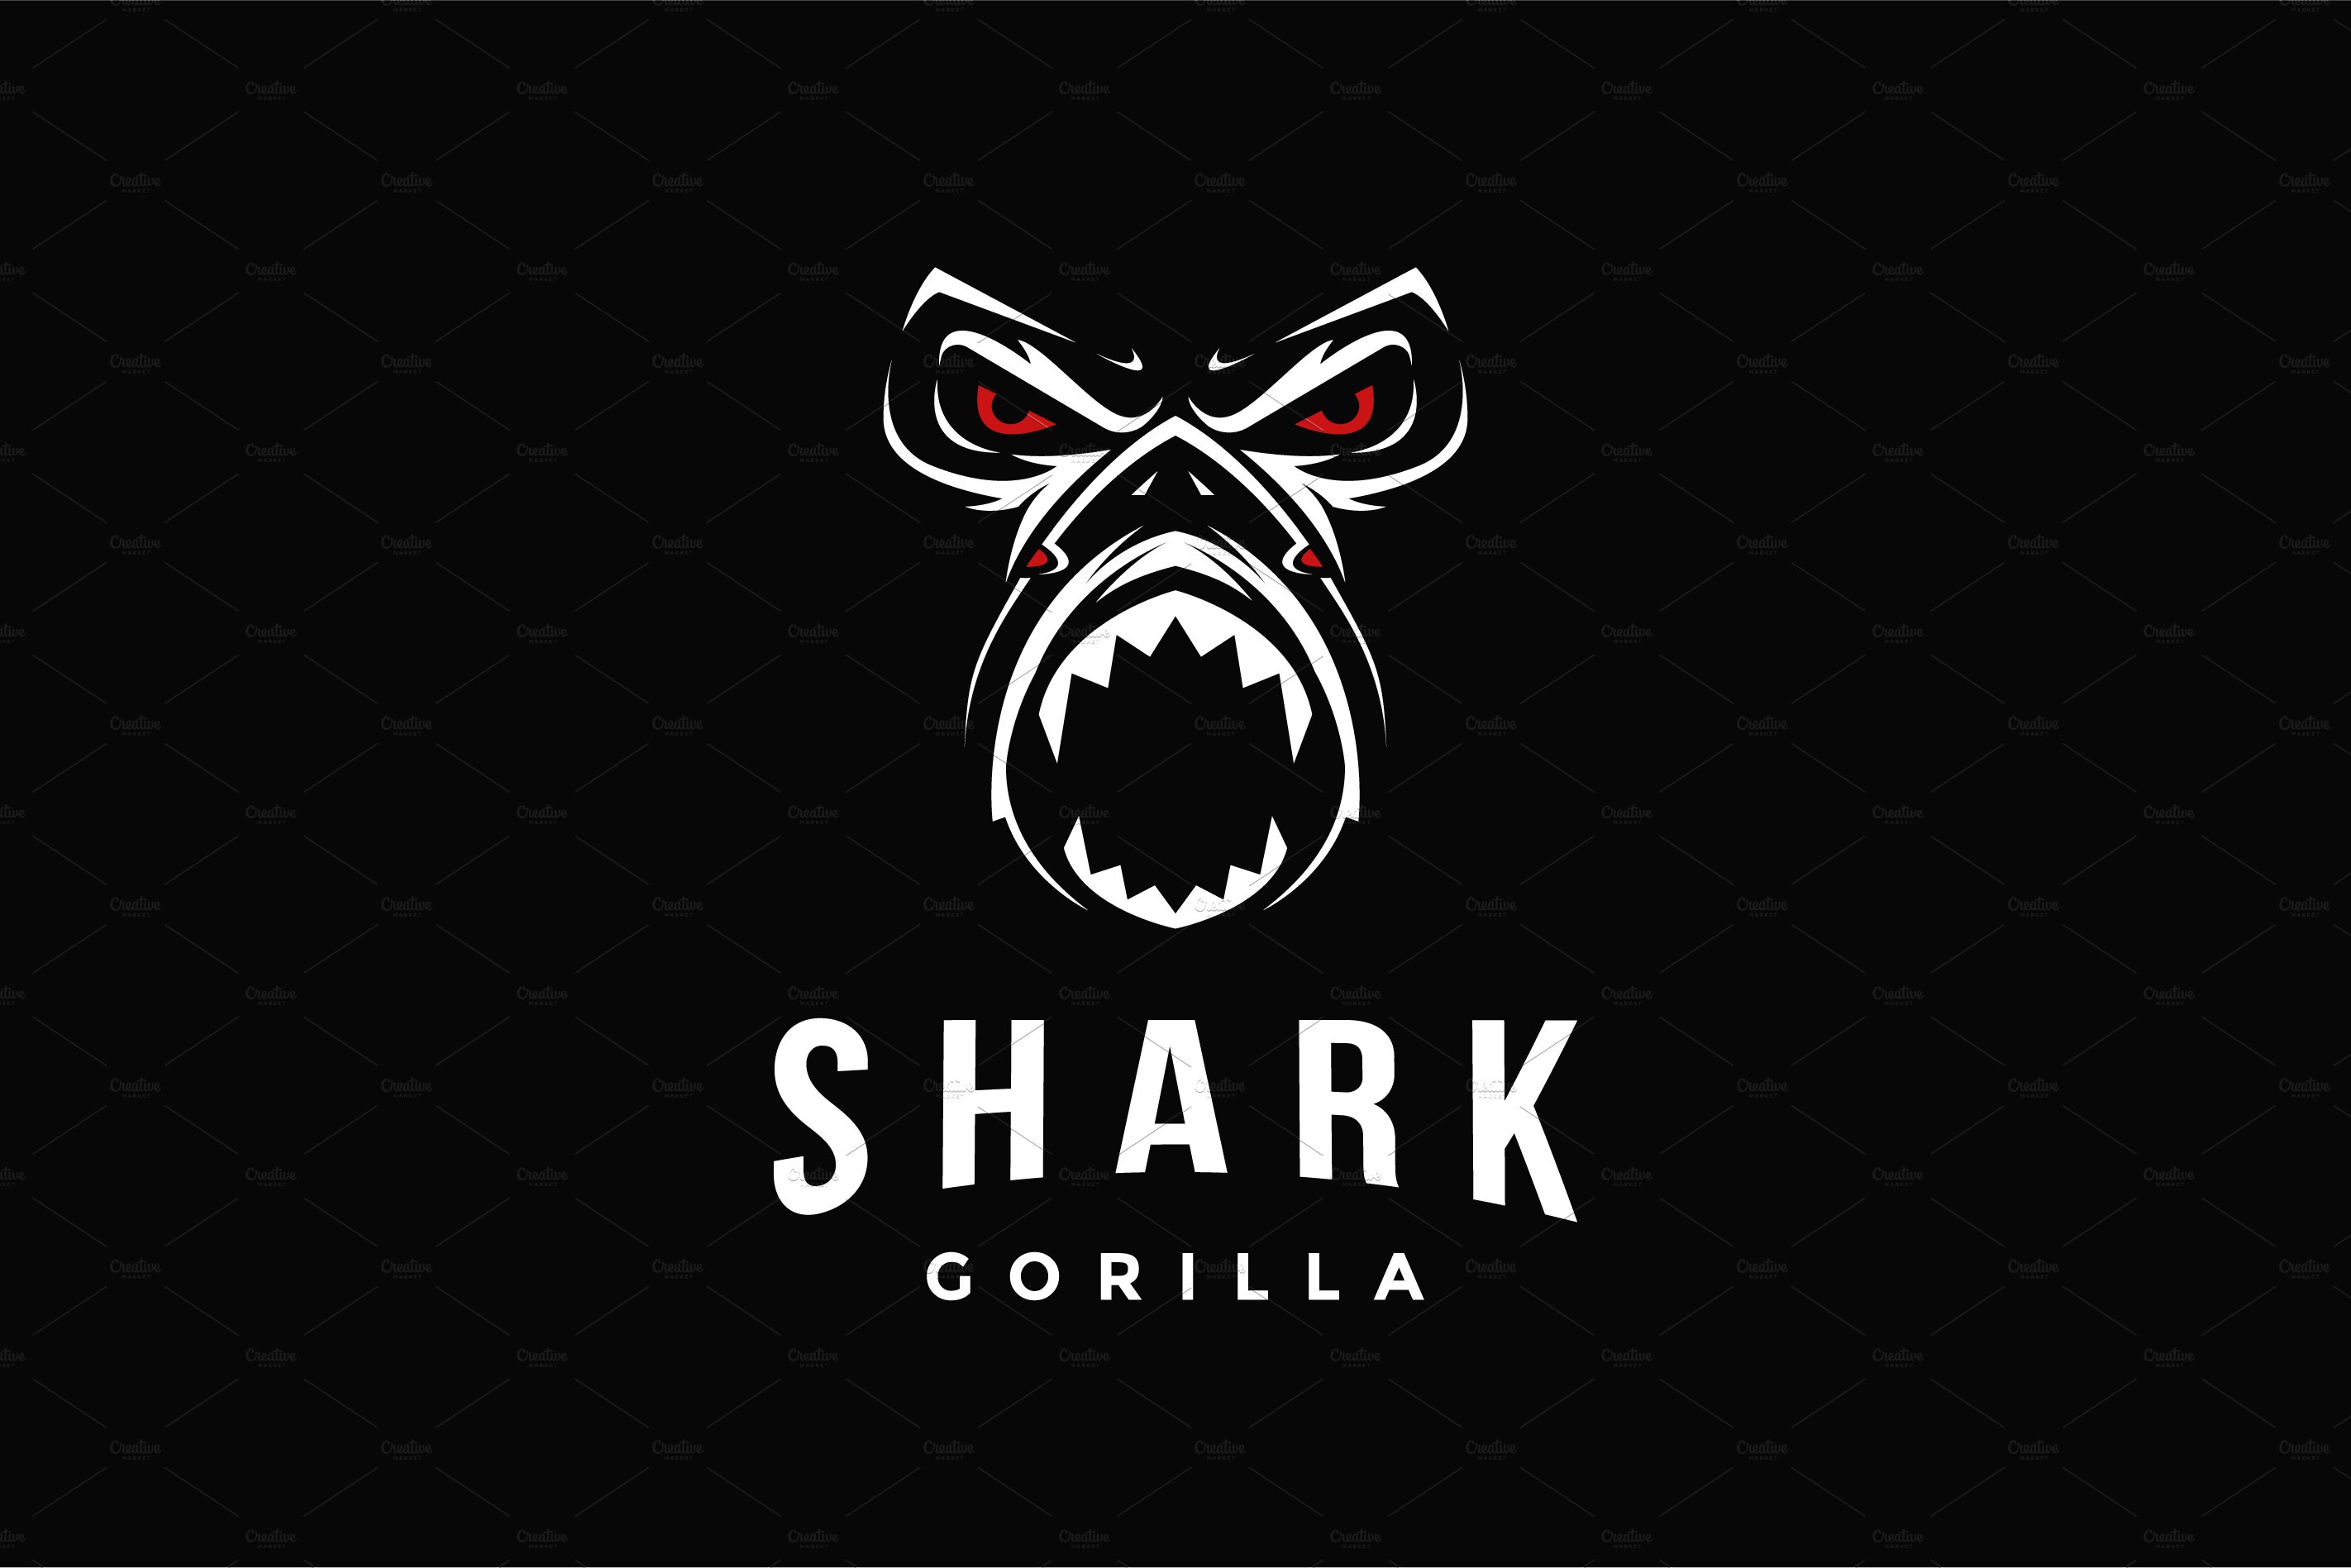 Powerful gorilla and shark logo cover image.